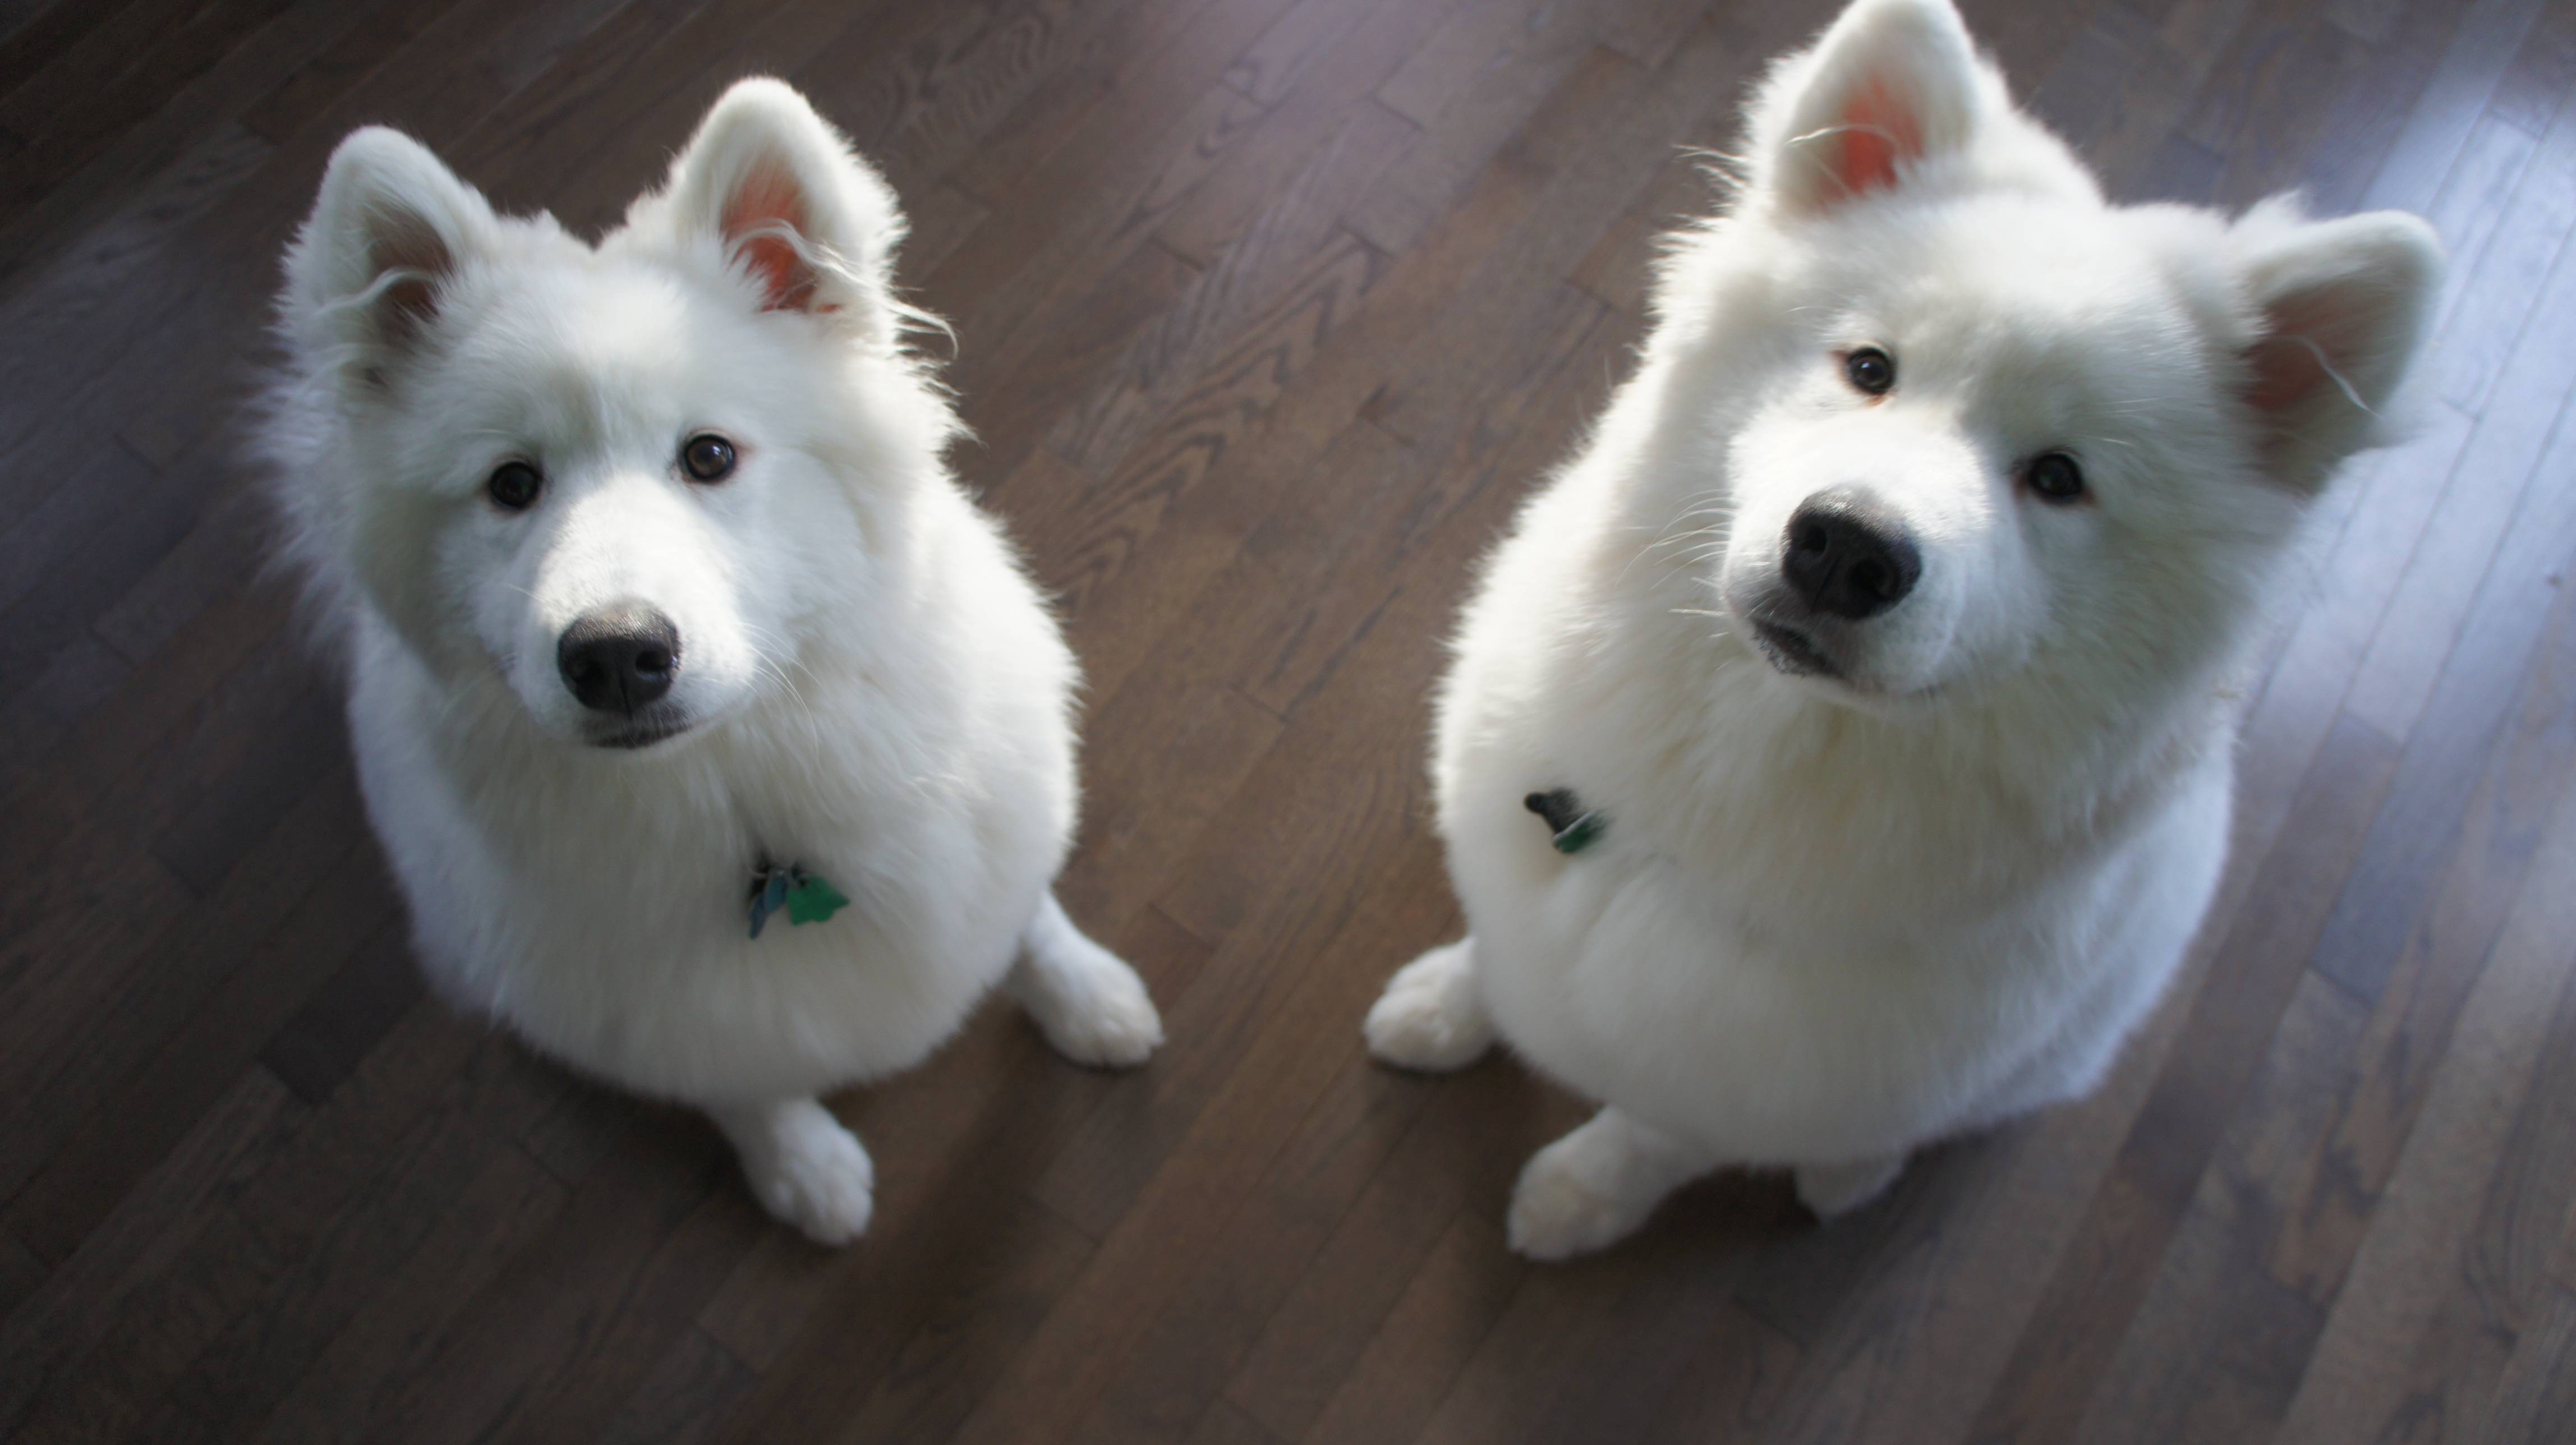 Two Samoyed dogs photo and wallpaper. Beautiful Two Samoyed dogs